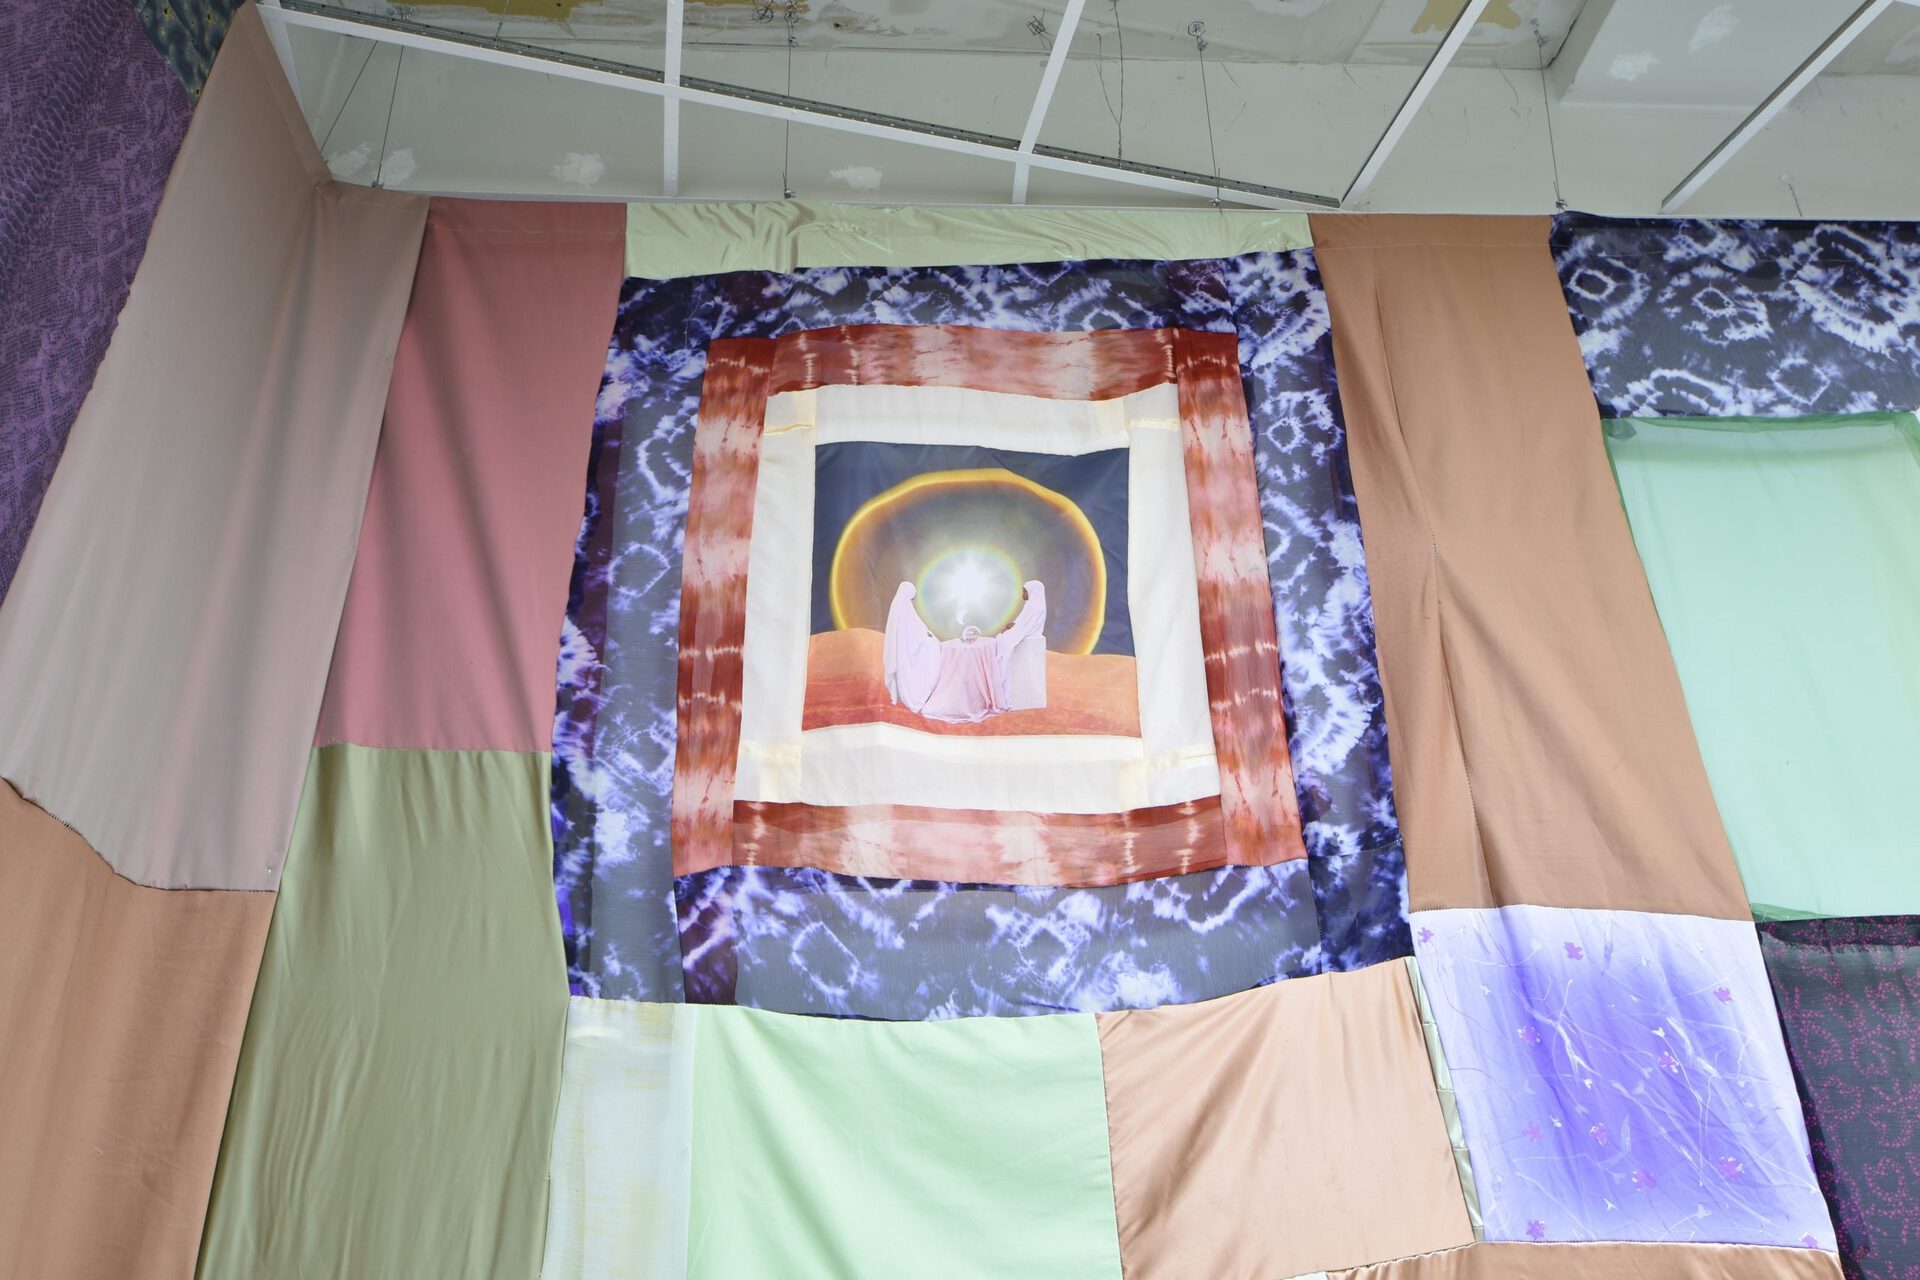 Viola Morini x Giacomo Giannantonio, "No child left behind" (detail), 2021, site-specific installation with various fabrics, variable dimensions